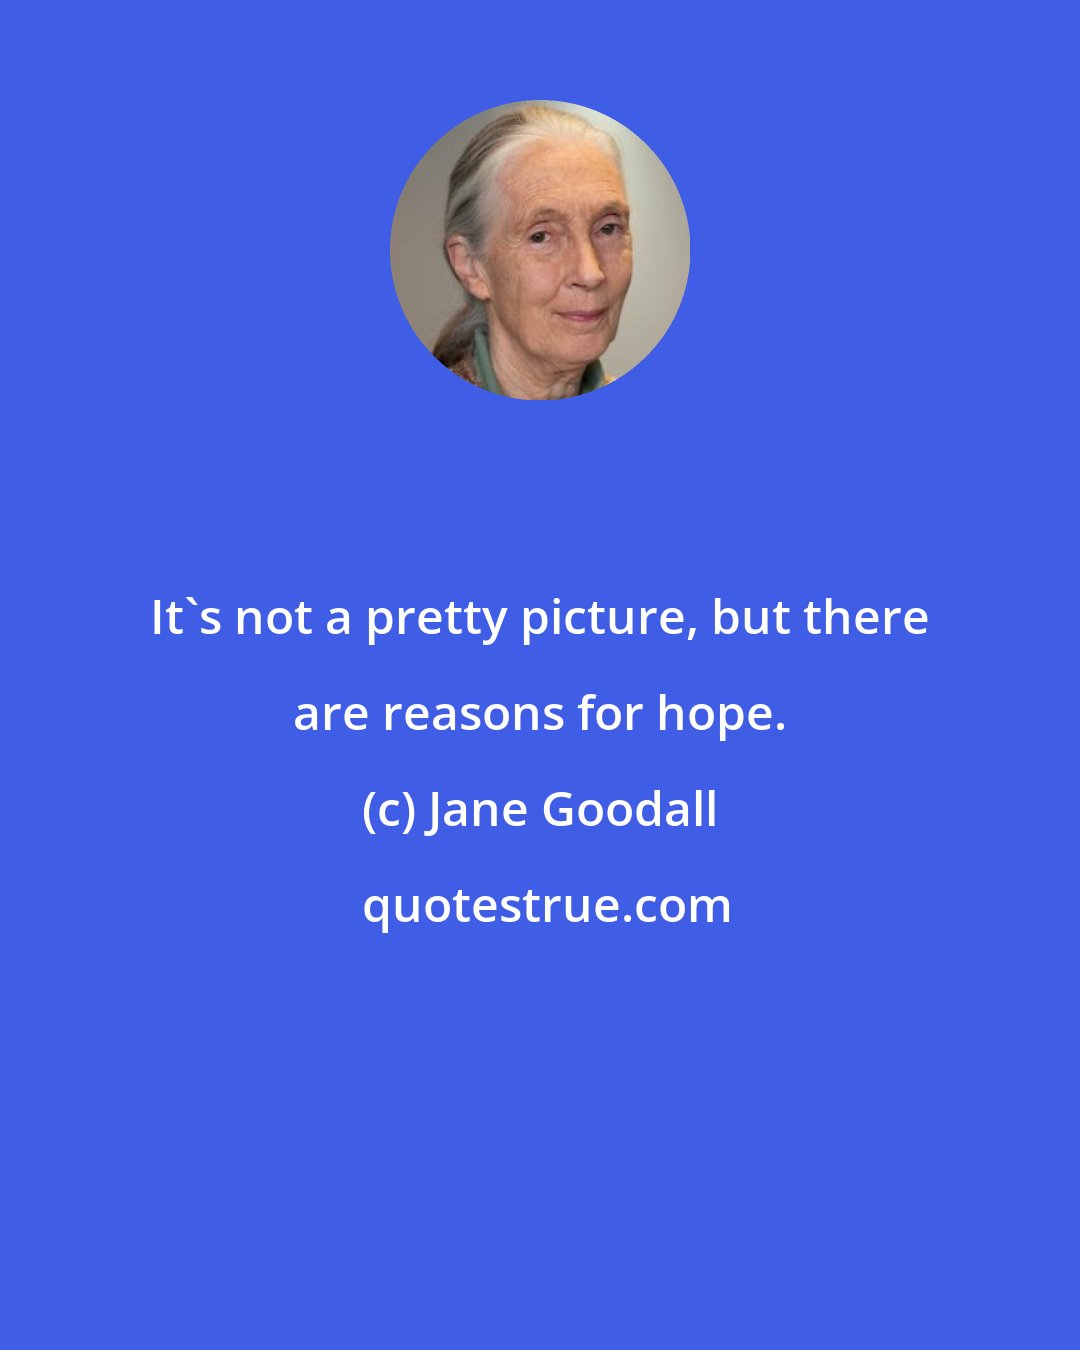 Jane Goodall: It's not a pretty picture, but there are reasons for hope.